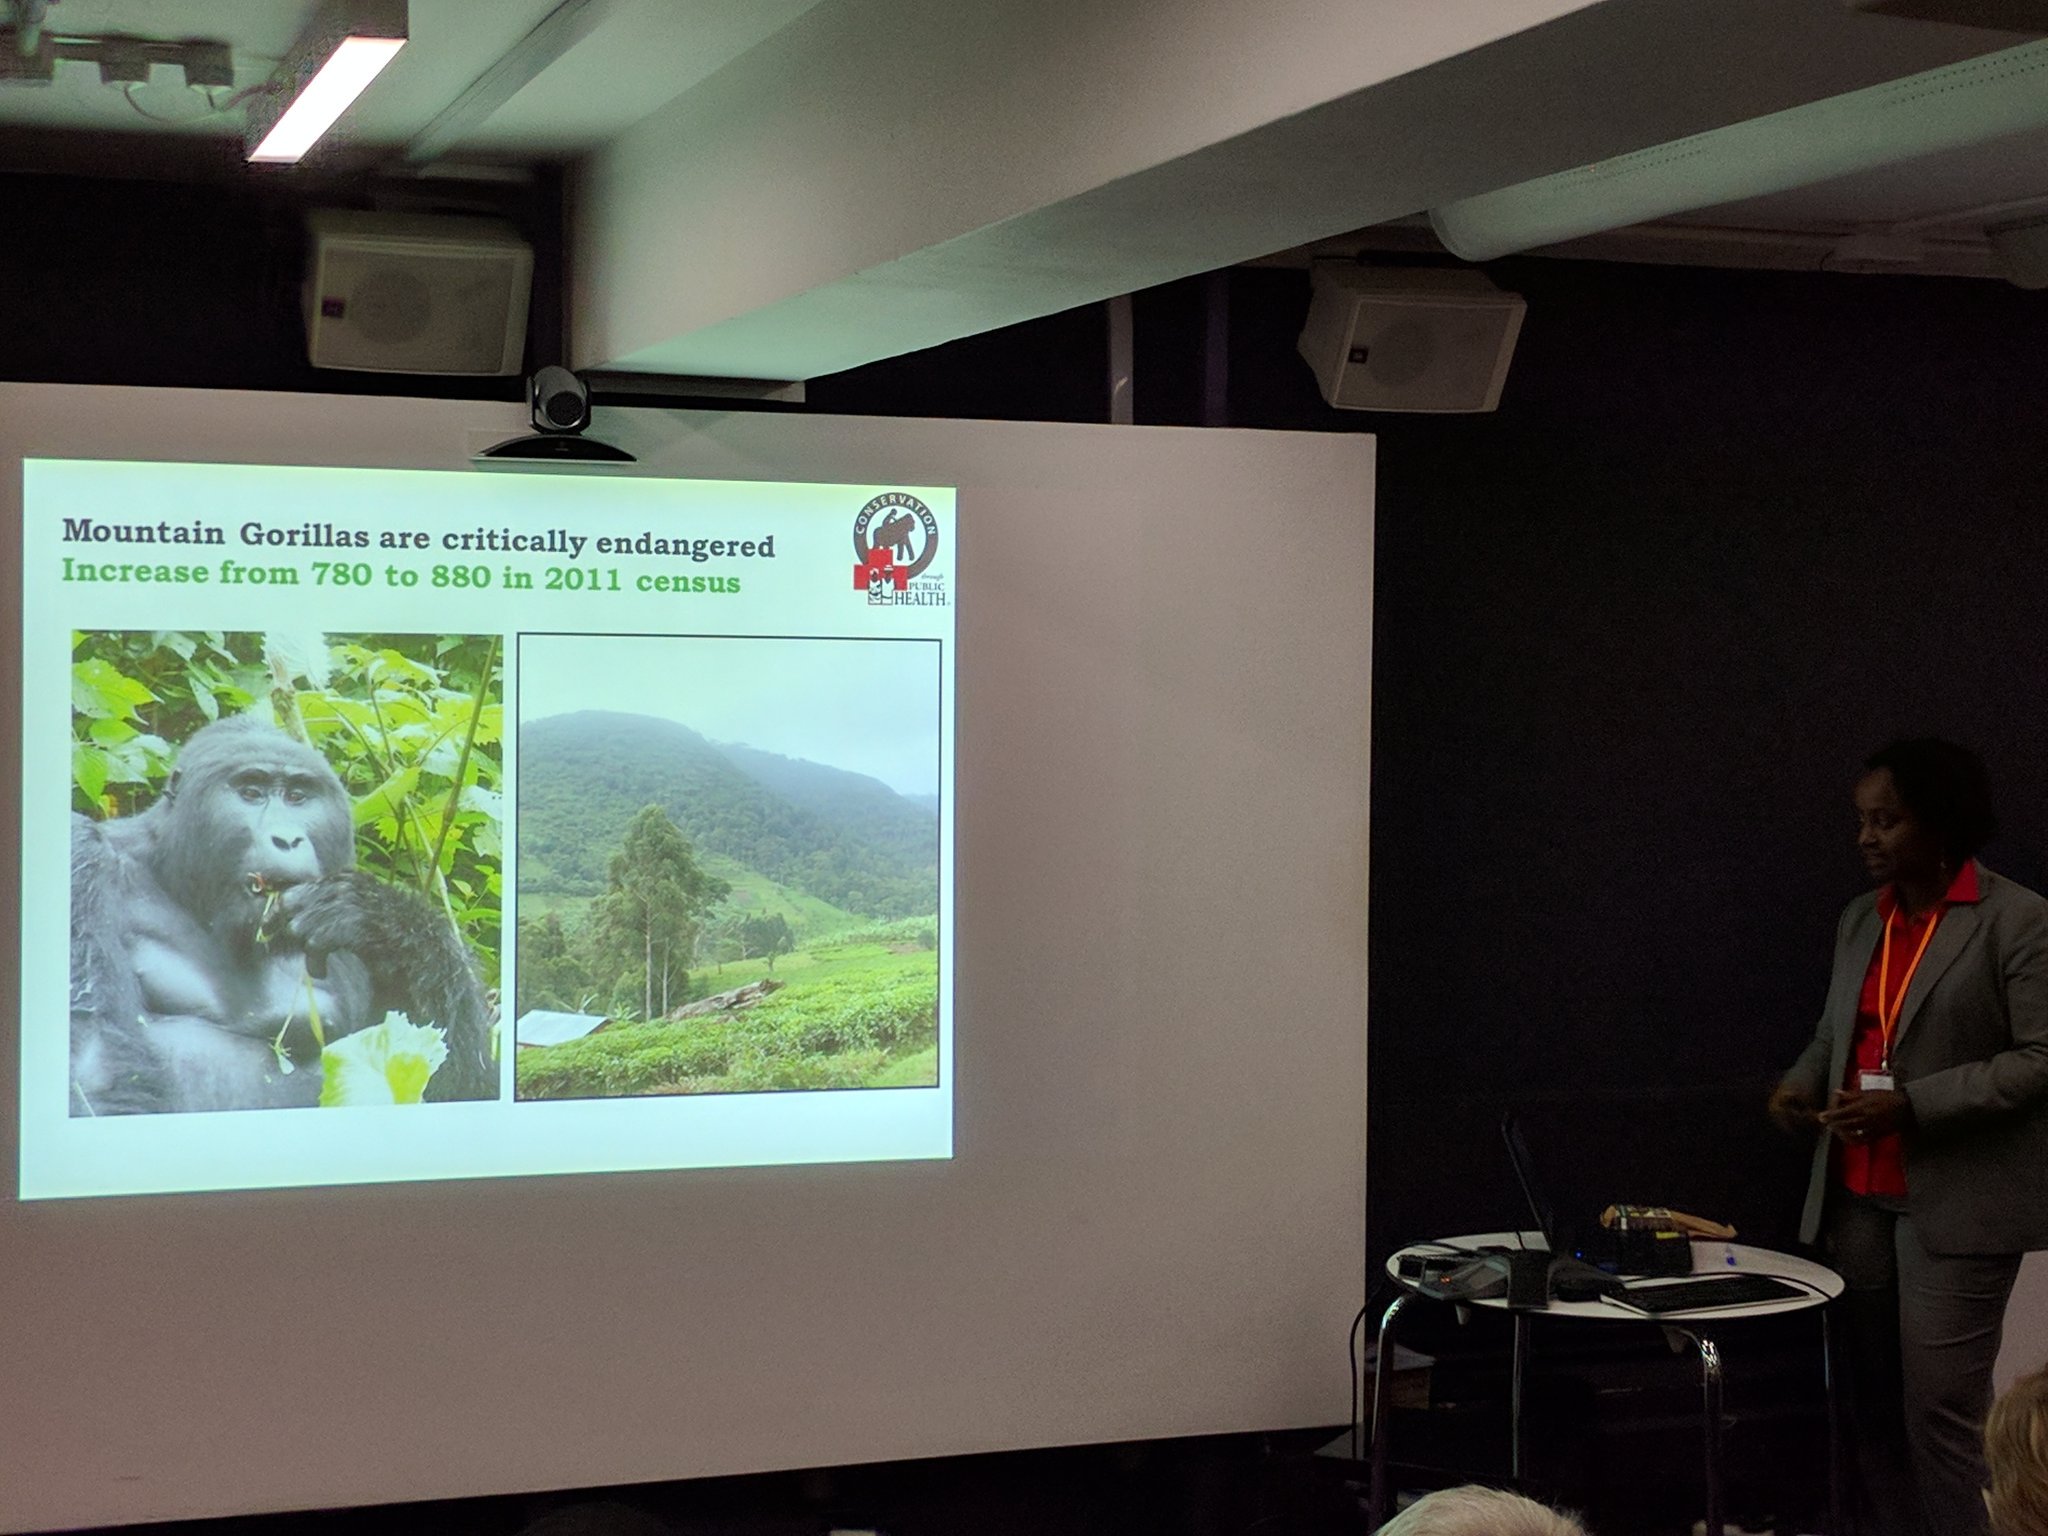 Listening to @DoctorGladys talk about critically endangered mountain gorillas at #Bwindi National Park in Uganda. https://t.co/EXJiOVwXP7